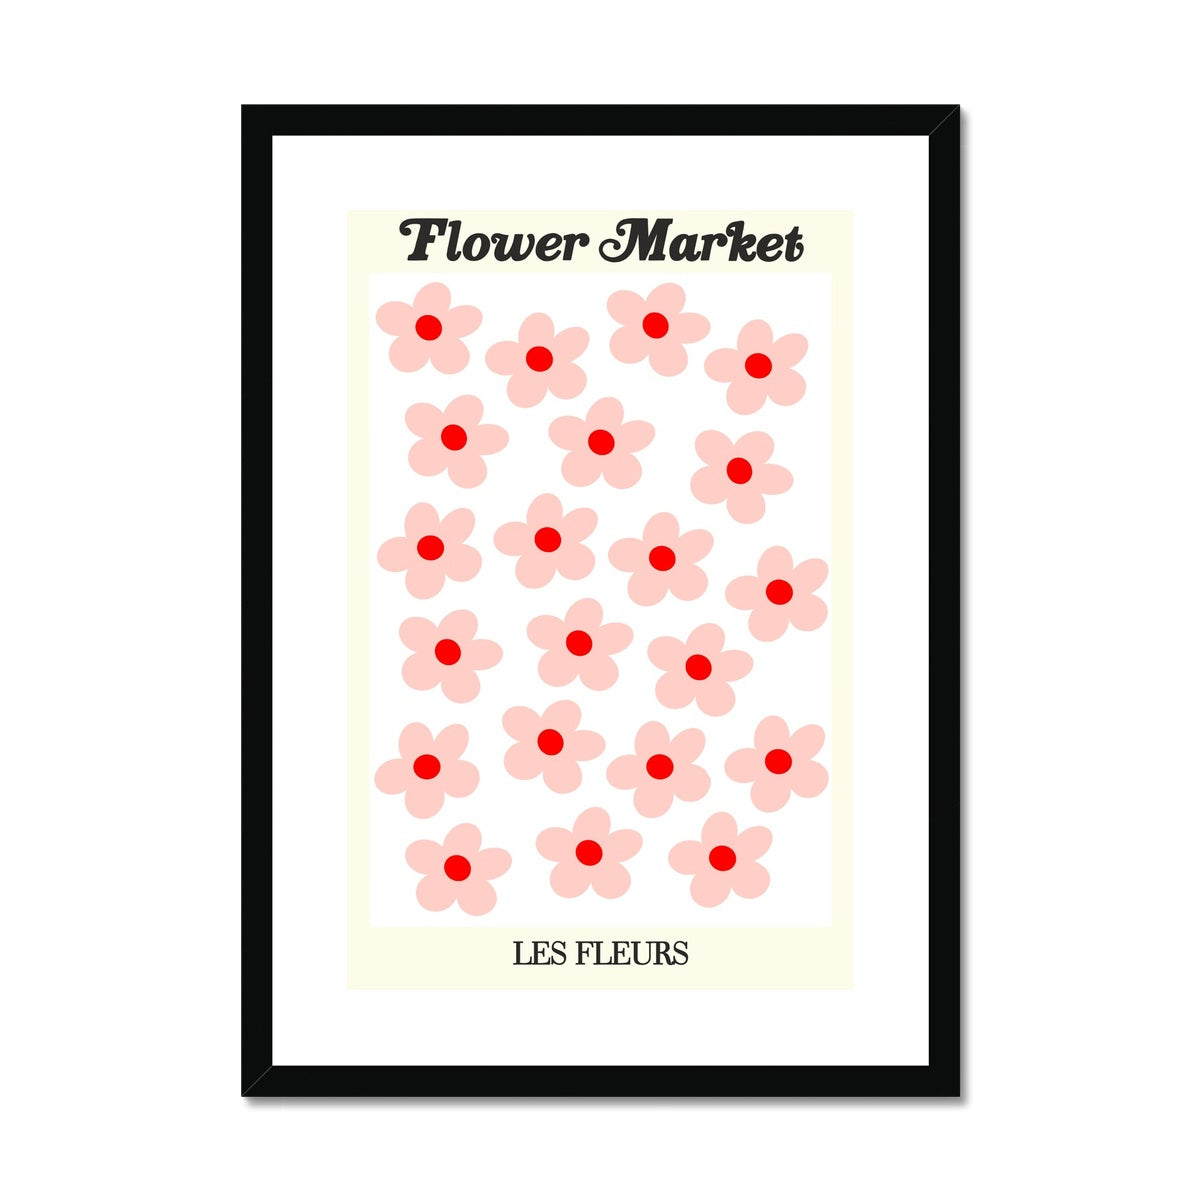 © les muses / Our Flower Market / Les Fleurs collection features wall art with a vibrant daisy design under original hand drawn typography. Danish pastel posters full of daisies to brighten up any gallery wall.
